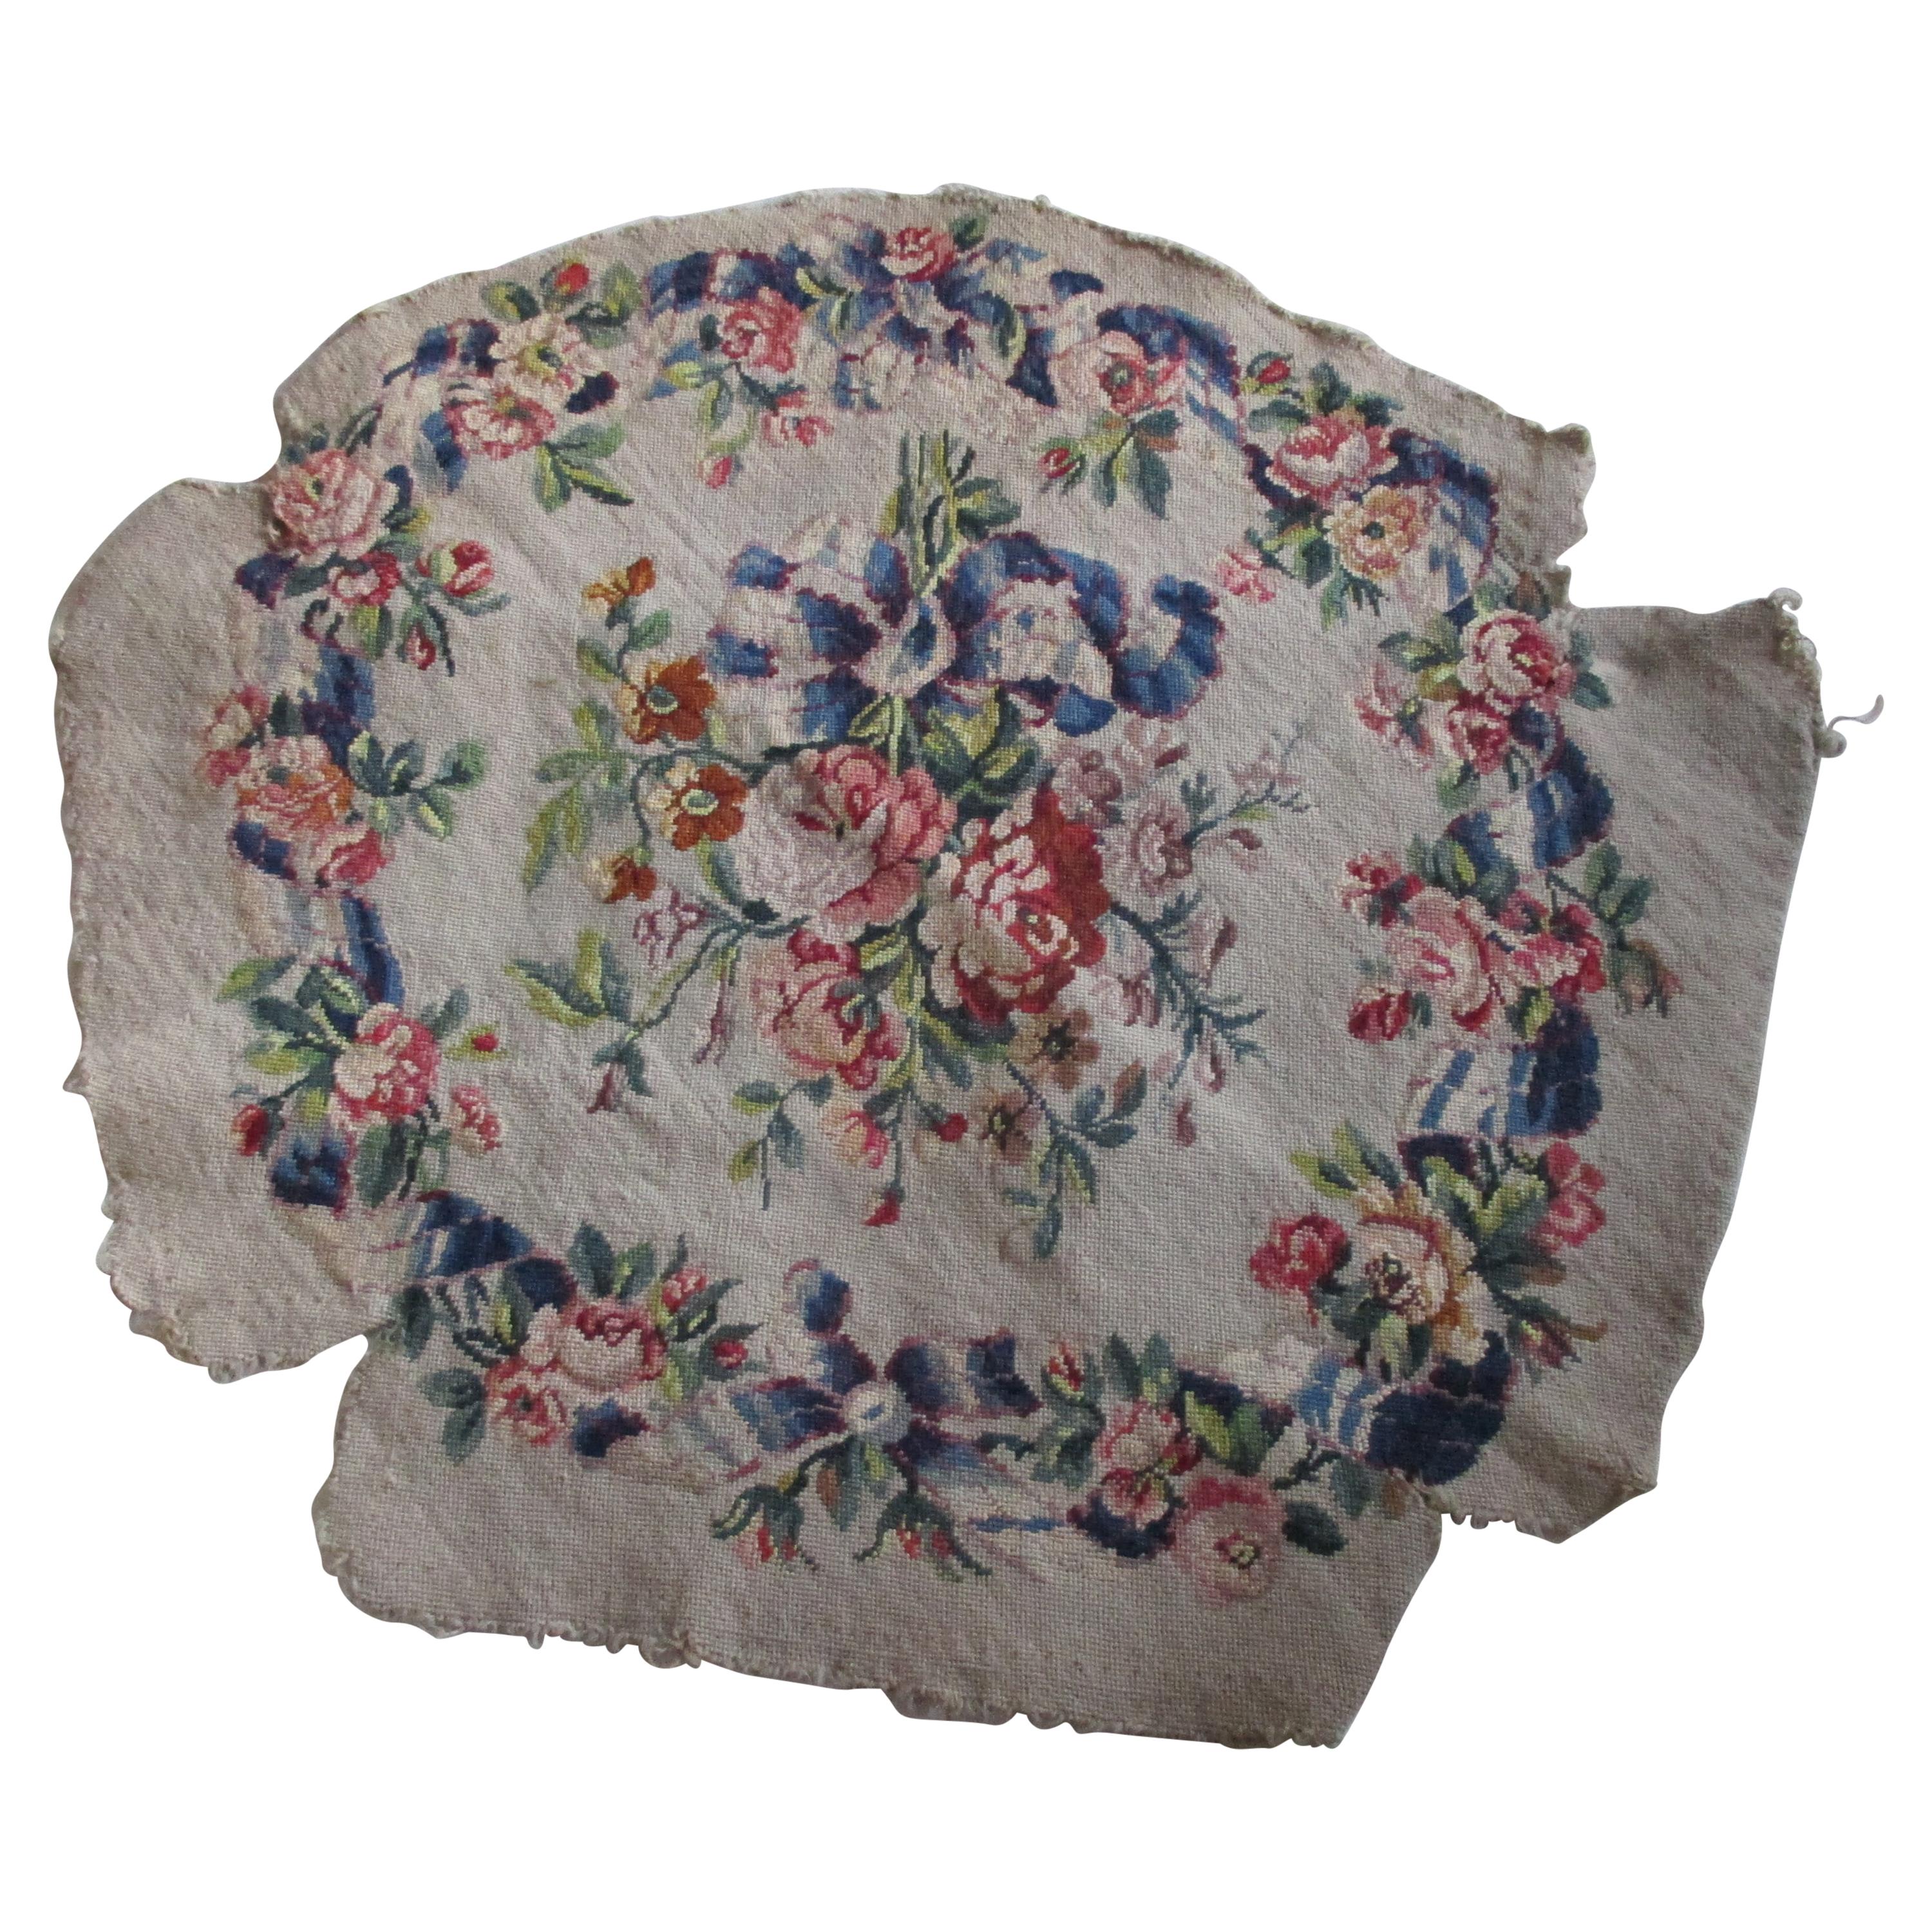 Antique Aubusson Tapestry Fragment with Center Floral Design